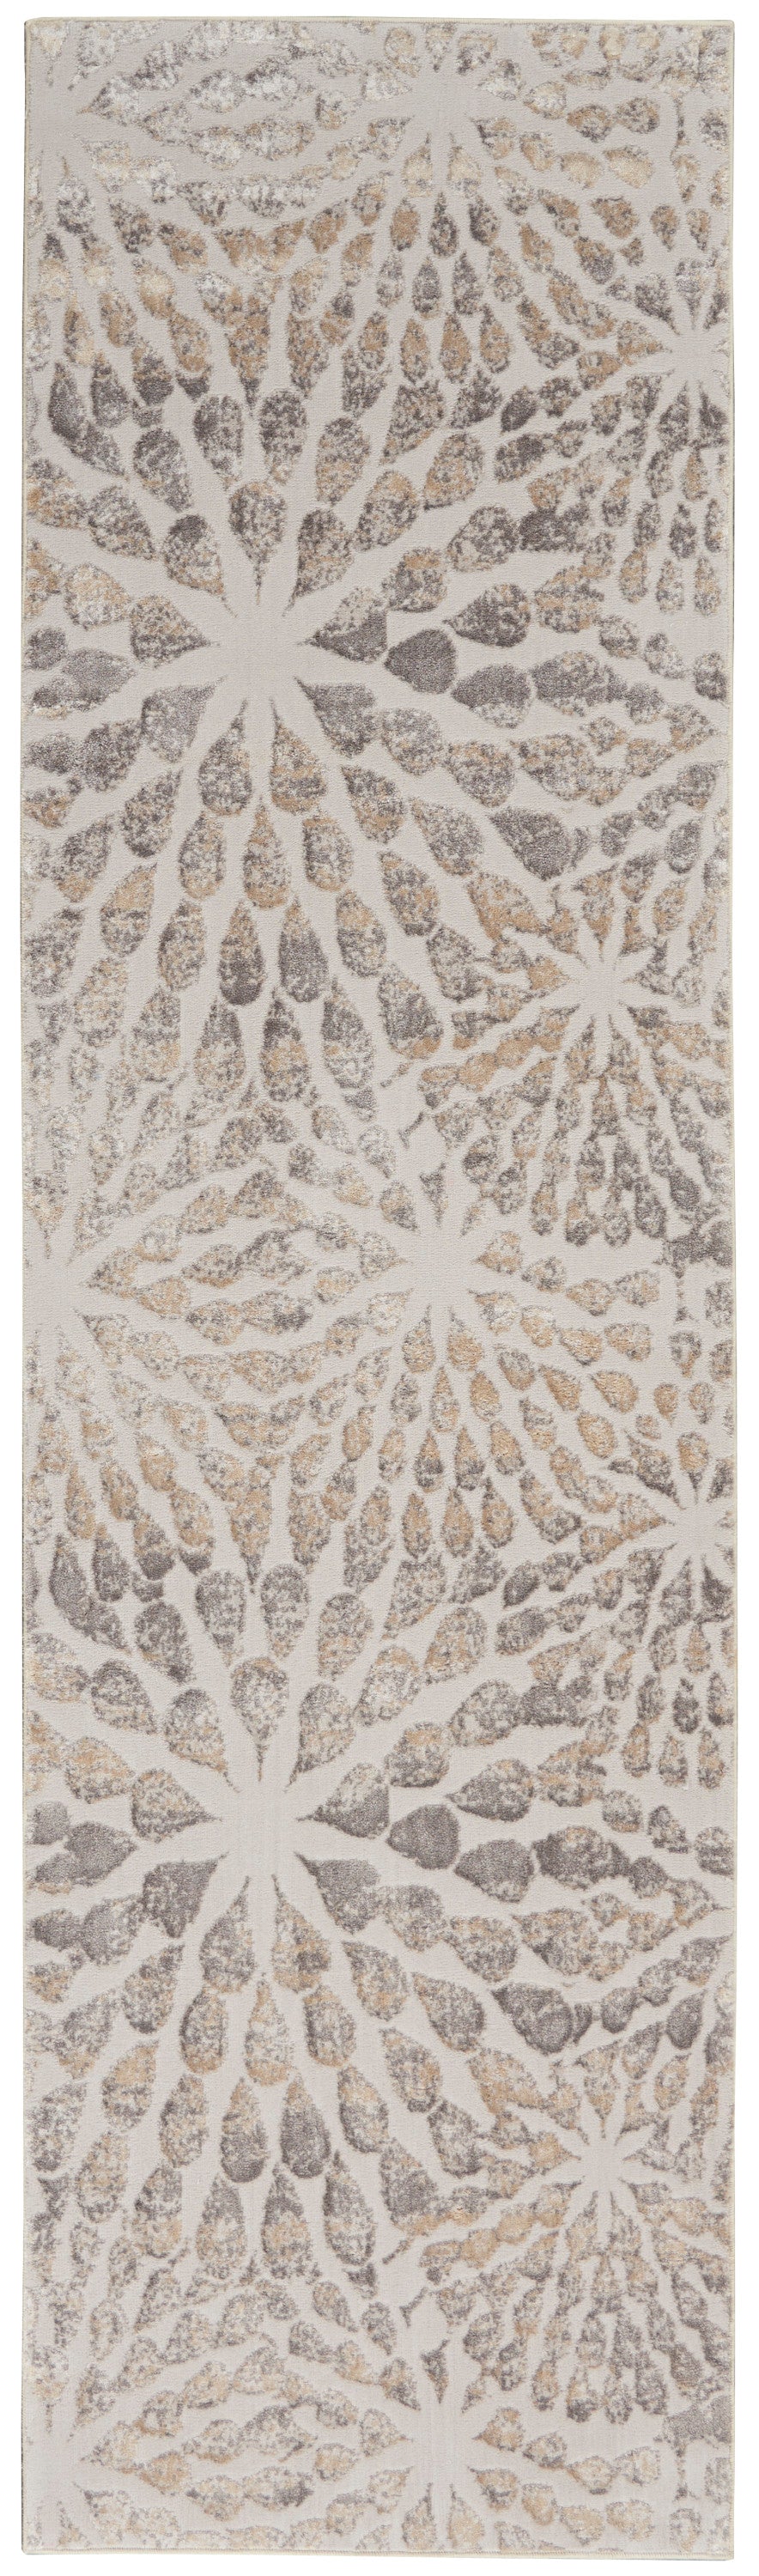 Nourison Home Silky Textures SLY07 Ivory Beige Contemporary Machinemade Rug